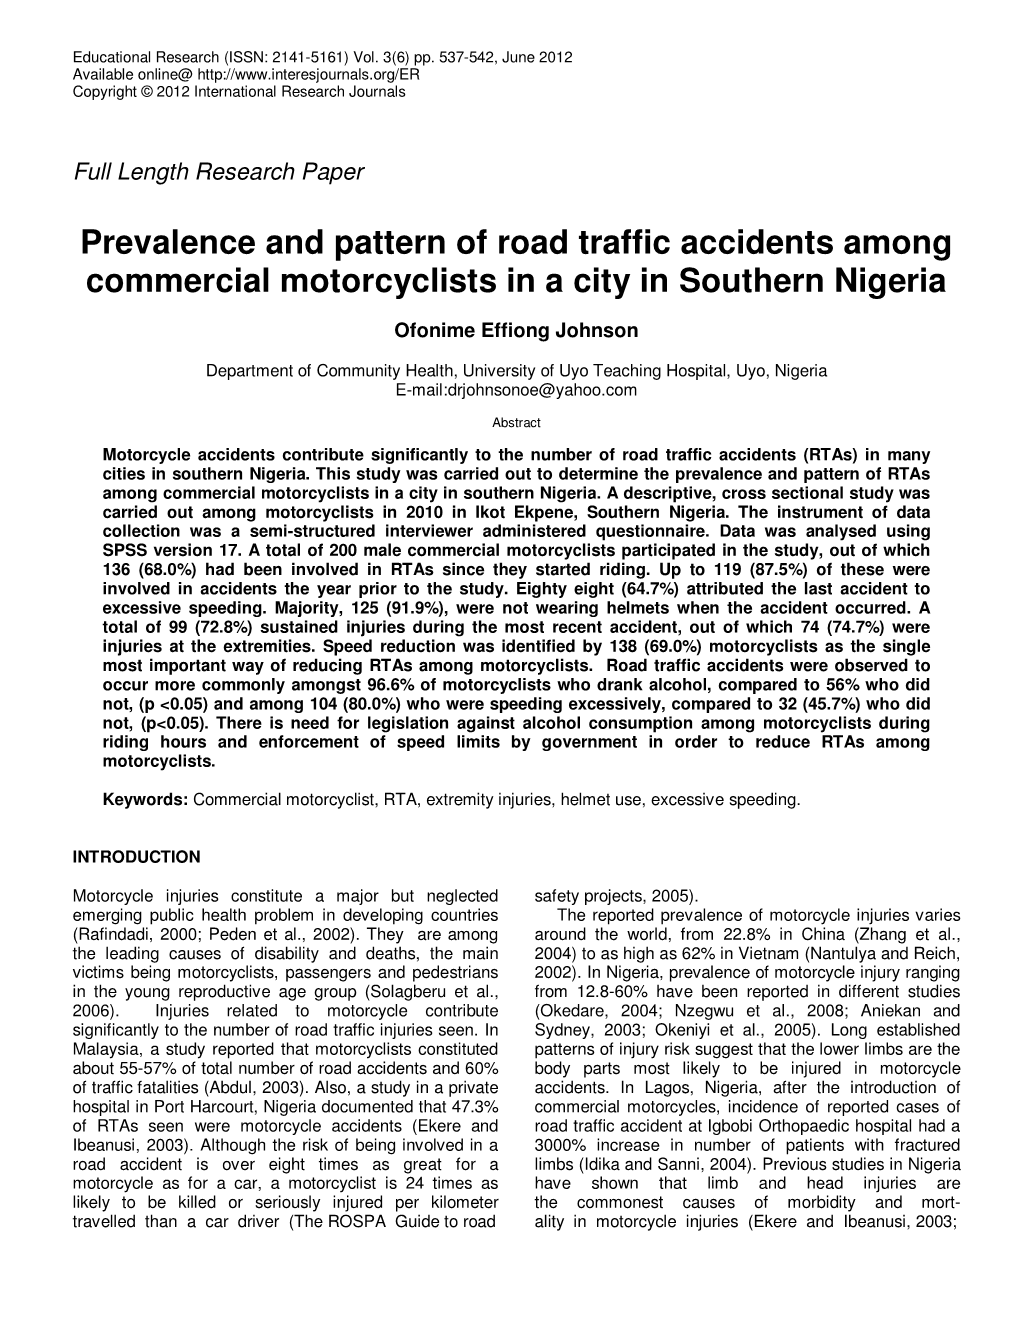 Prevalence and Pattern of Road Traffic Accidents Among Commercial Motorcyclists in a City in Southern Nigeria